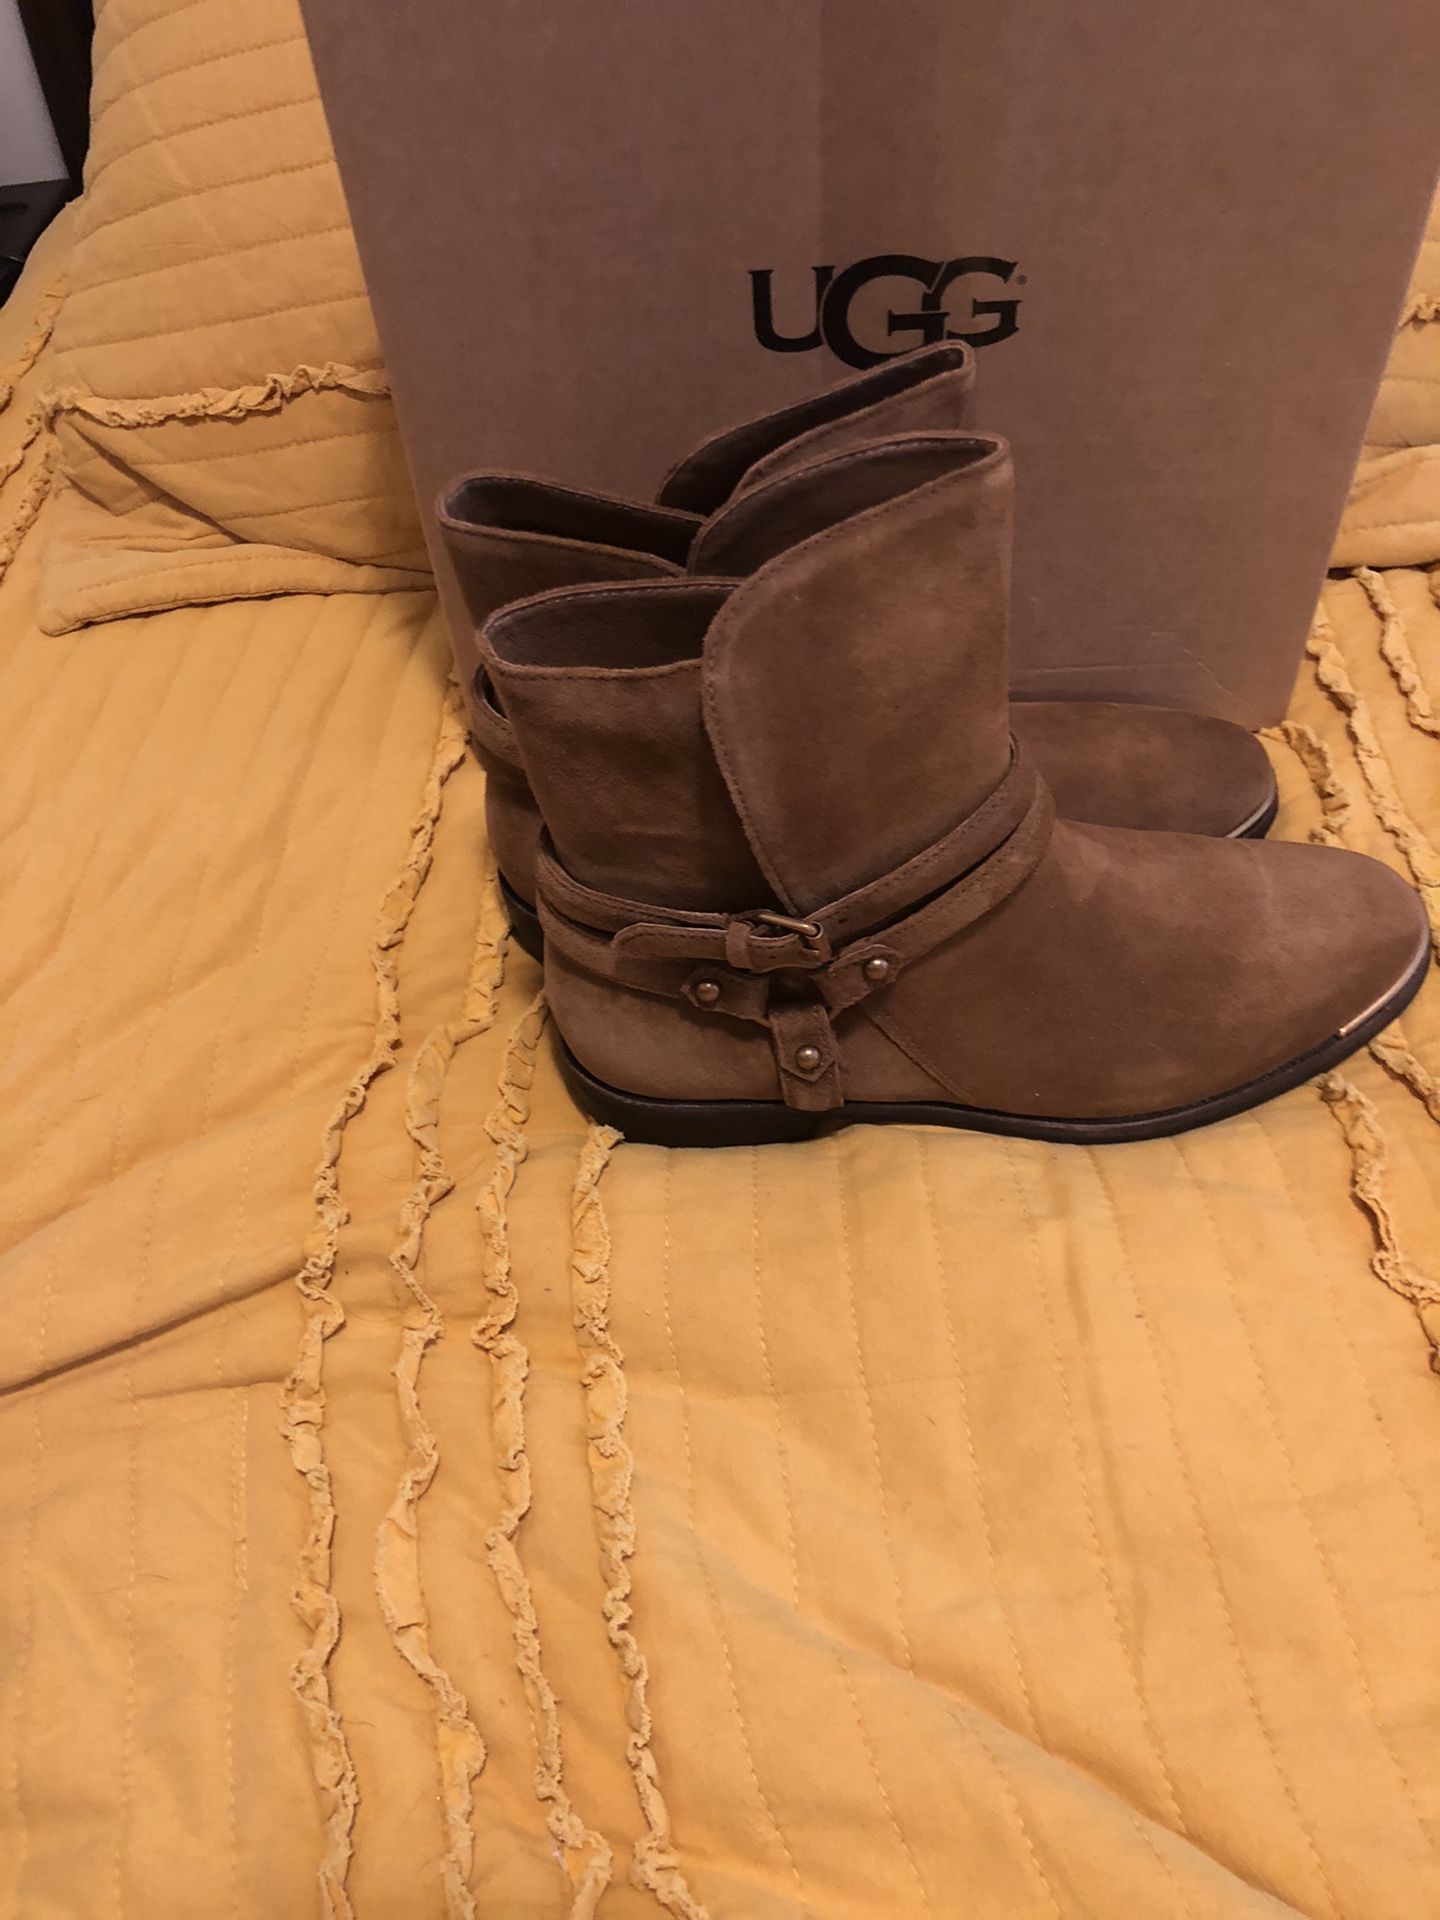 New women’s uggs boots size 8.5